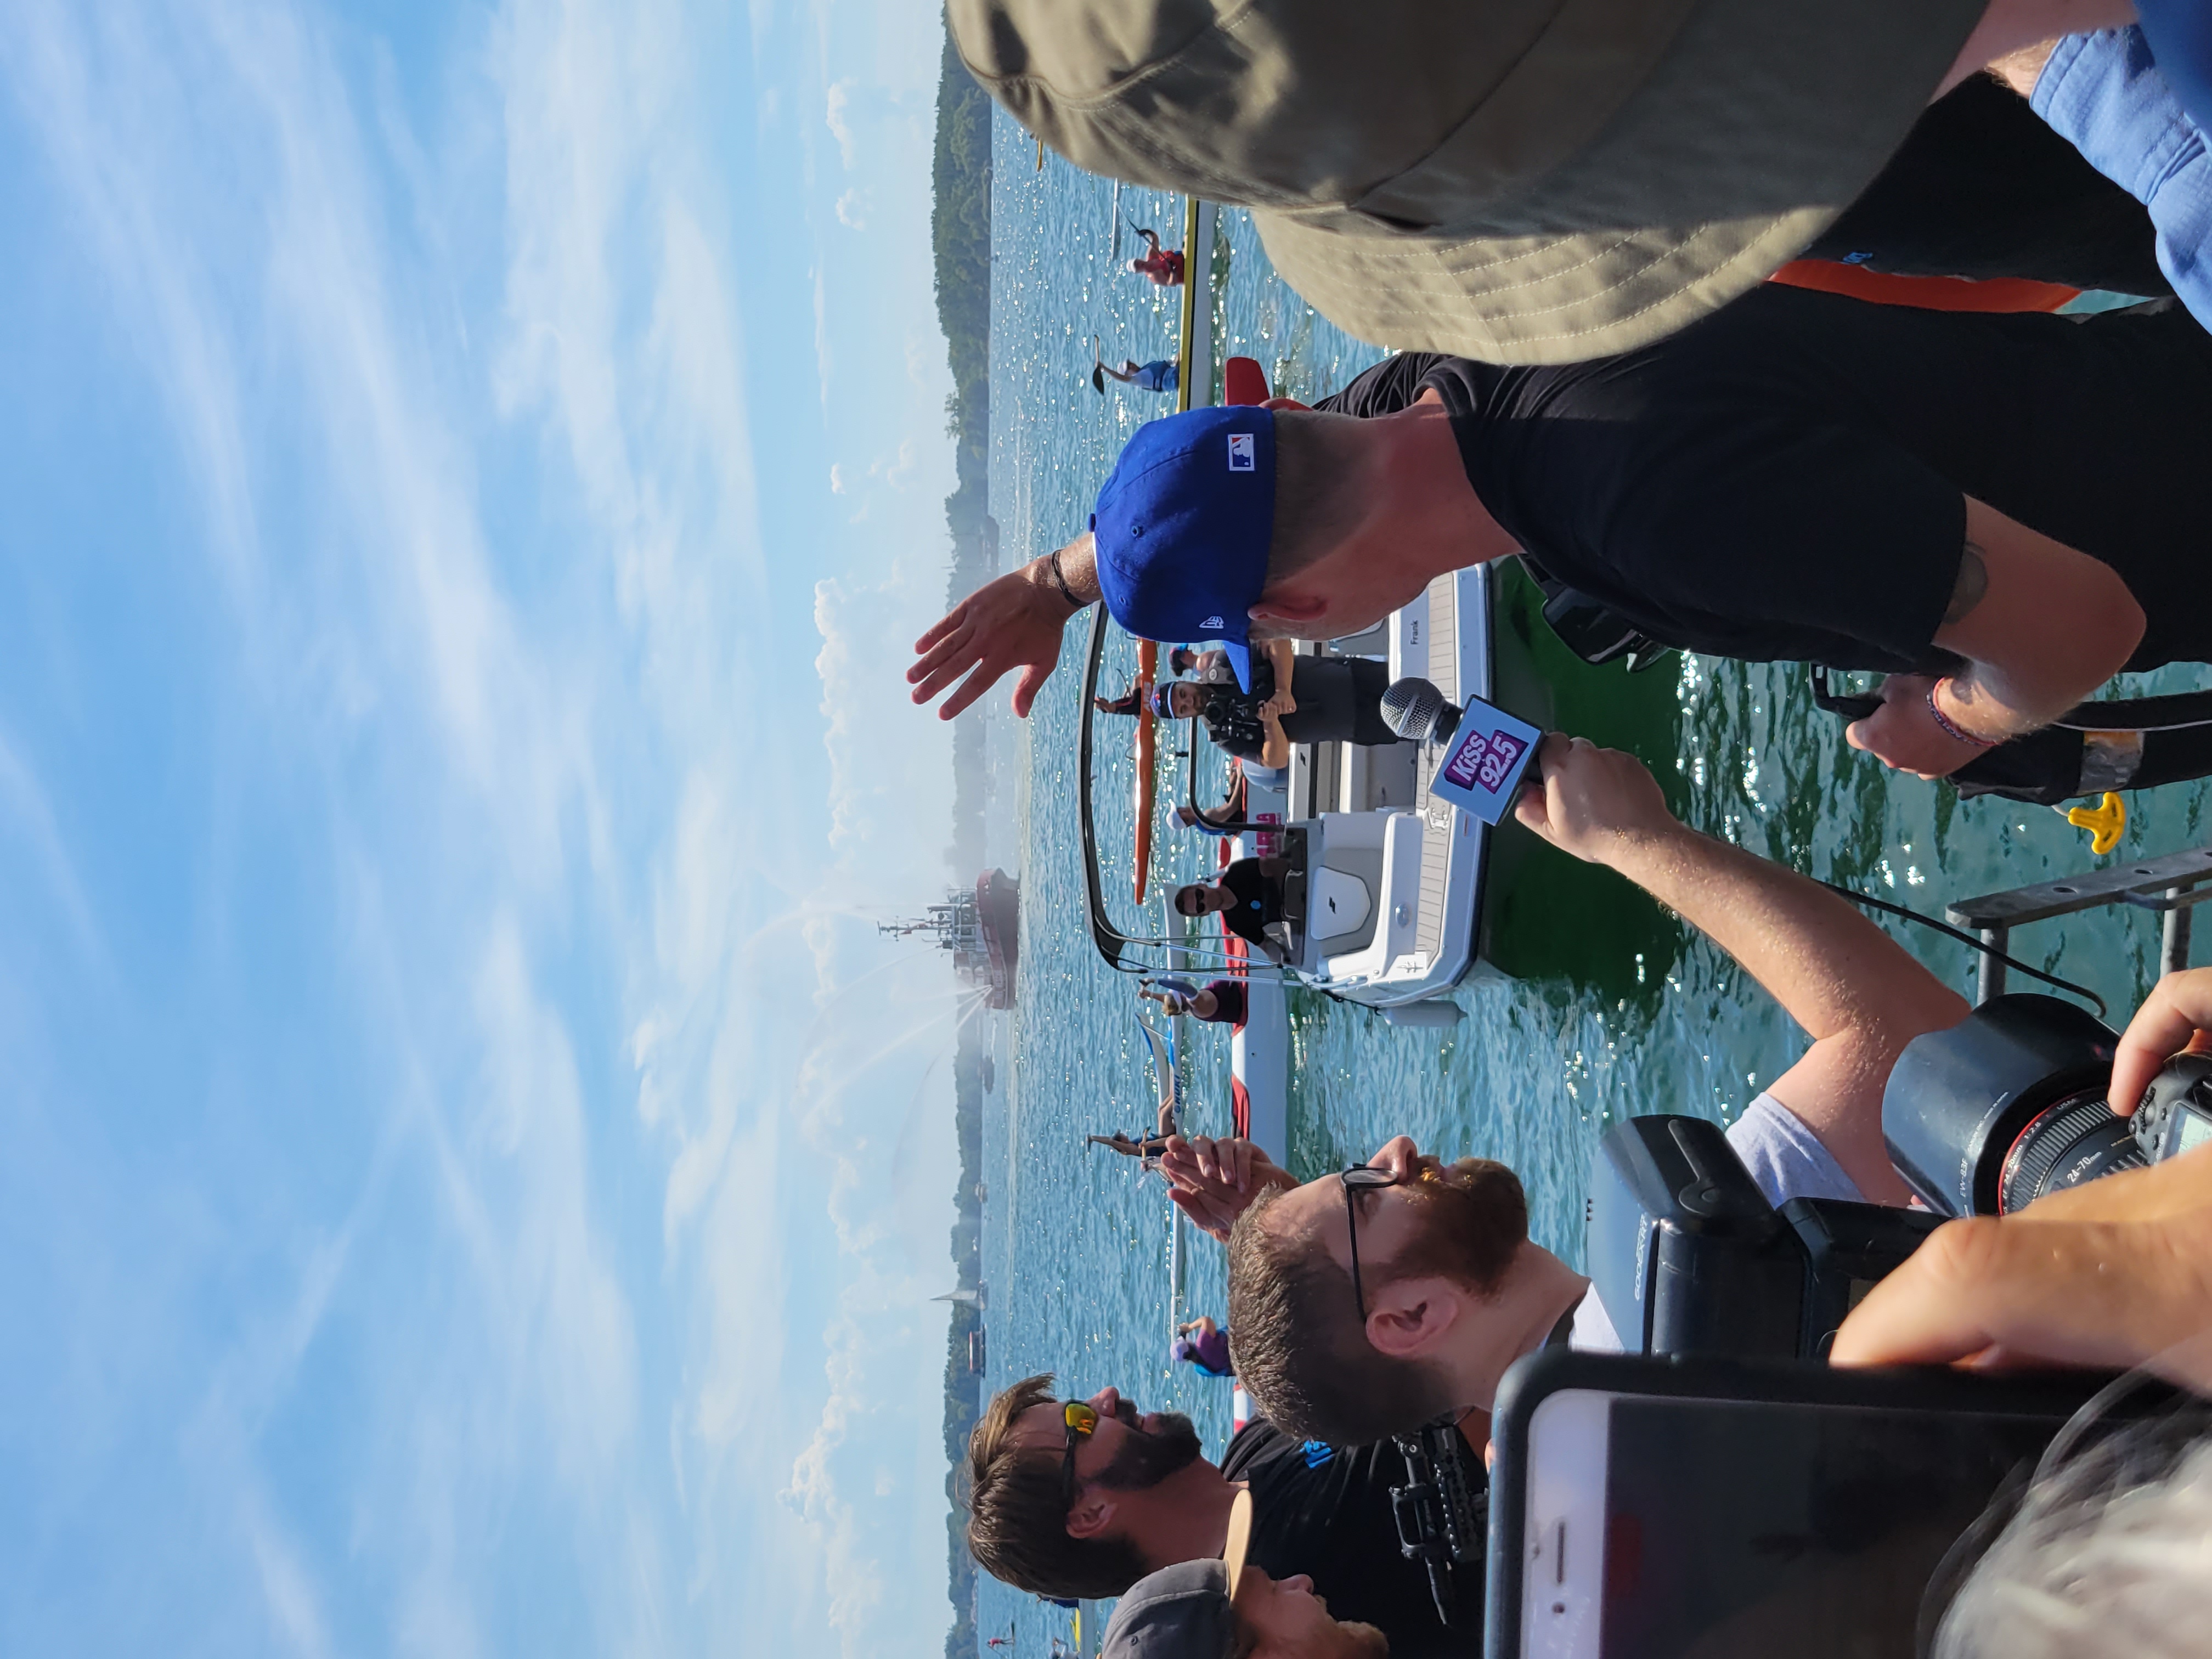 Back of Mike Shoreman's head as he is getting interviewed by a person holding a microphone. There is a crowd around Mike. He is waving to many boats on the water in front of him.